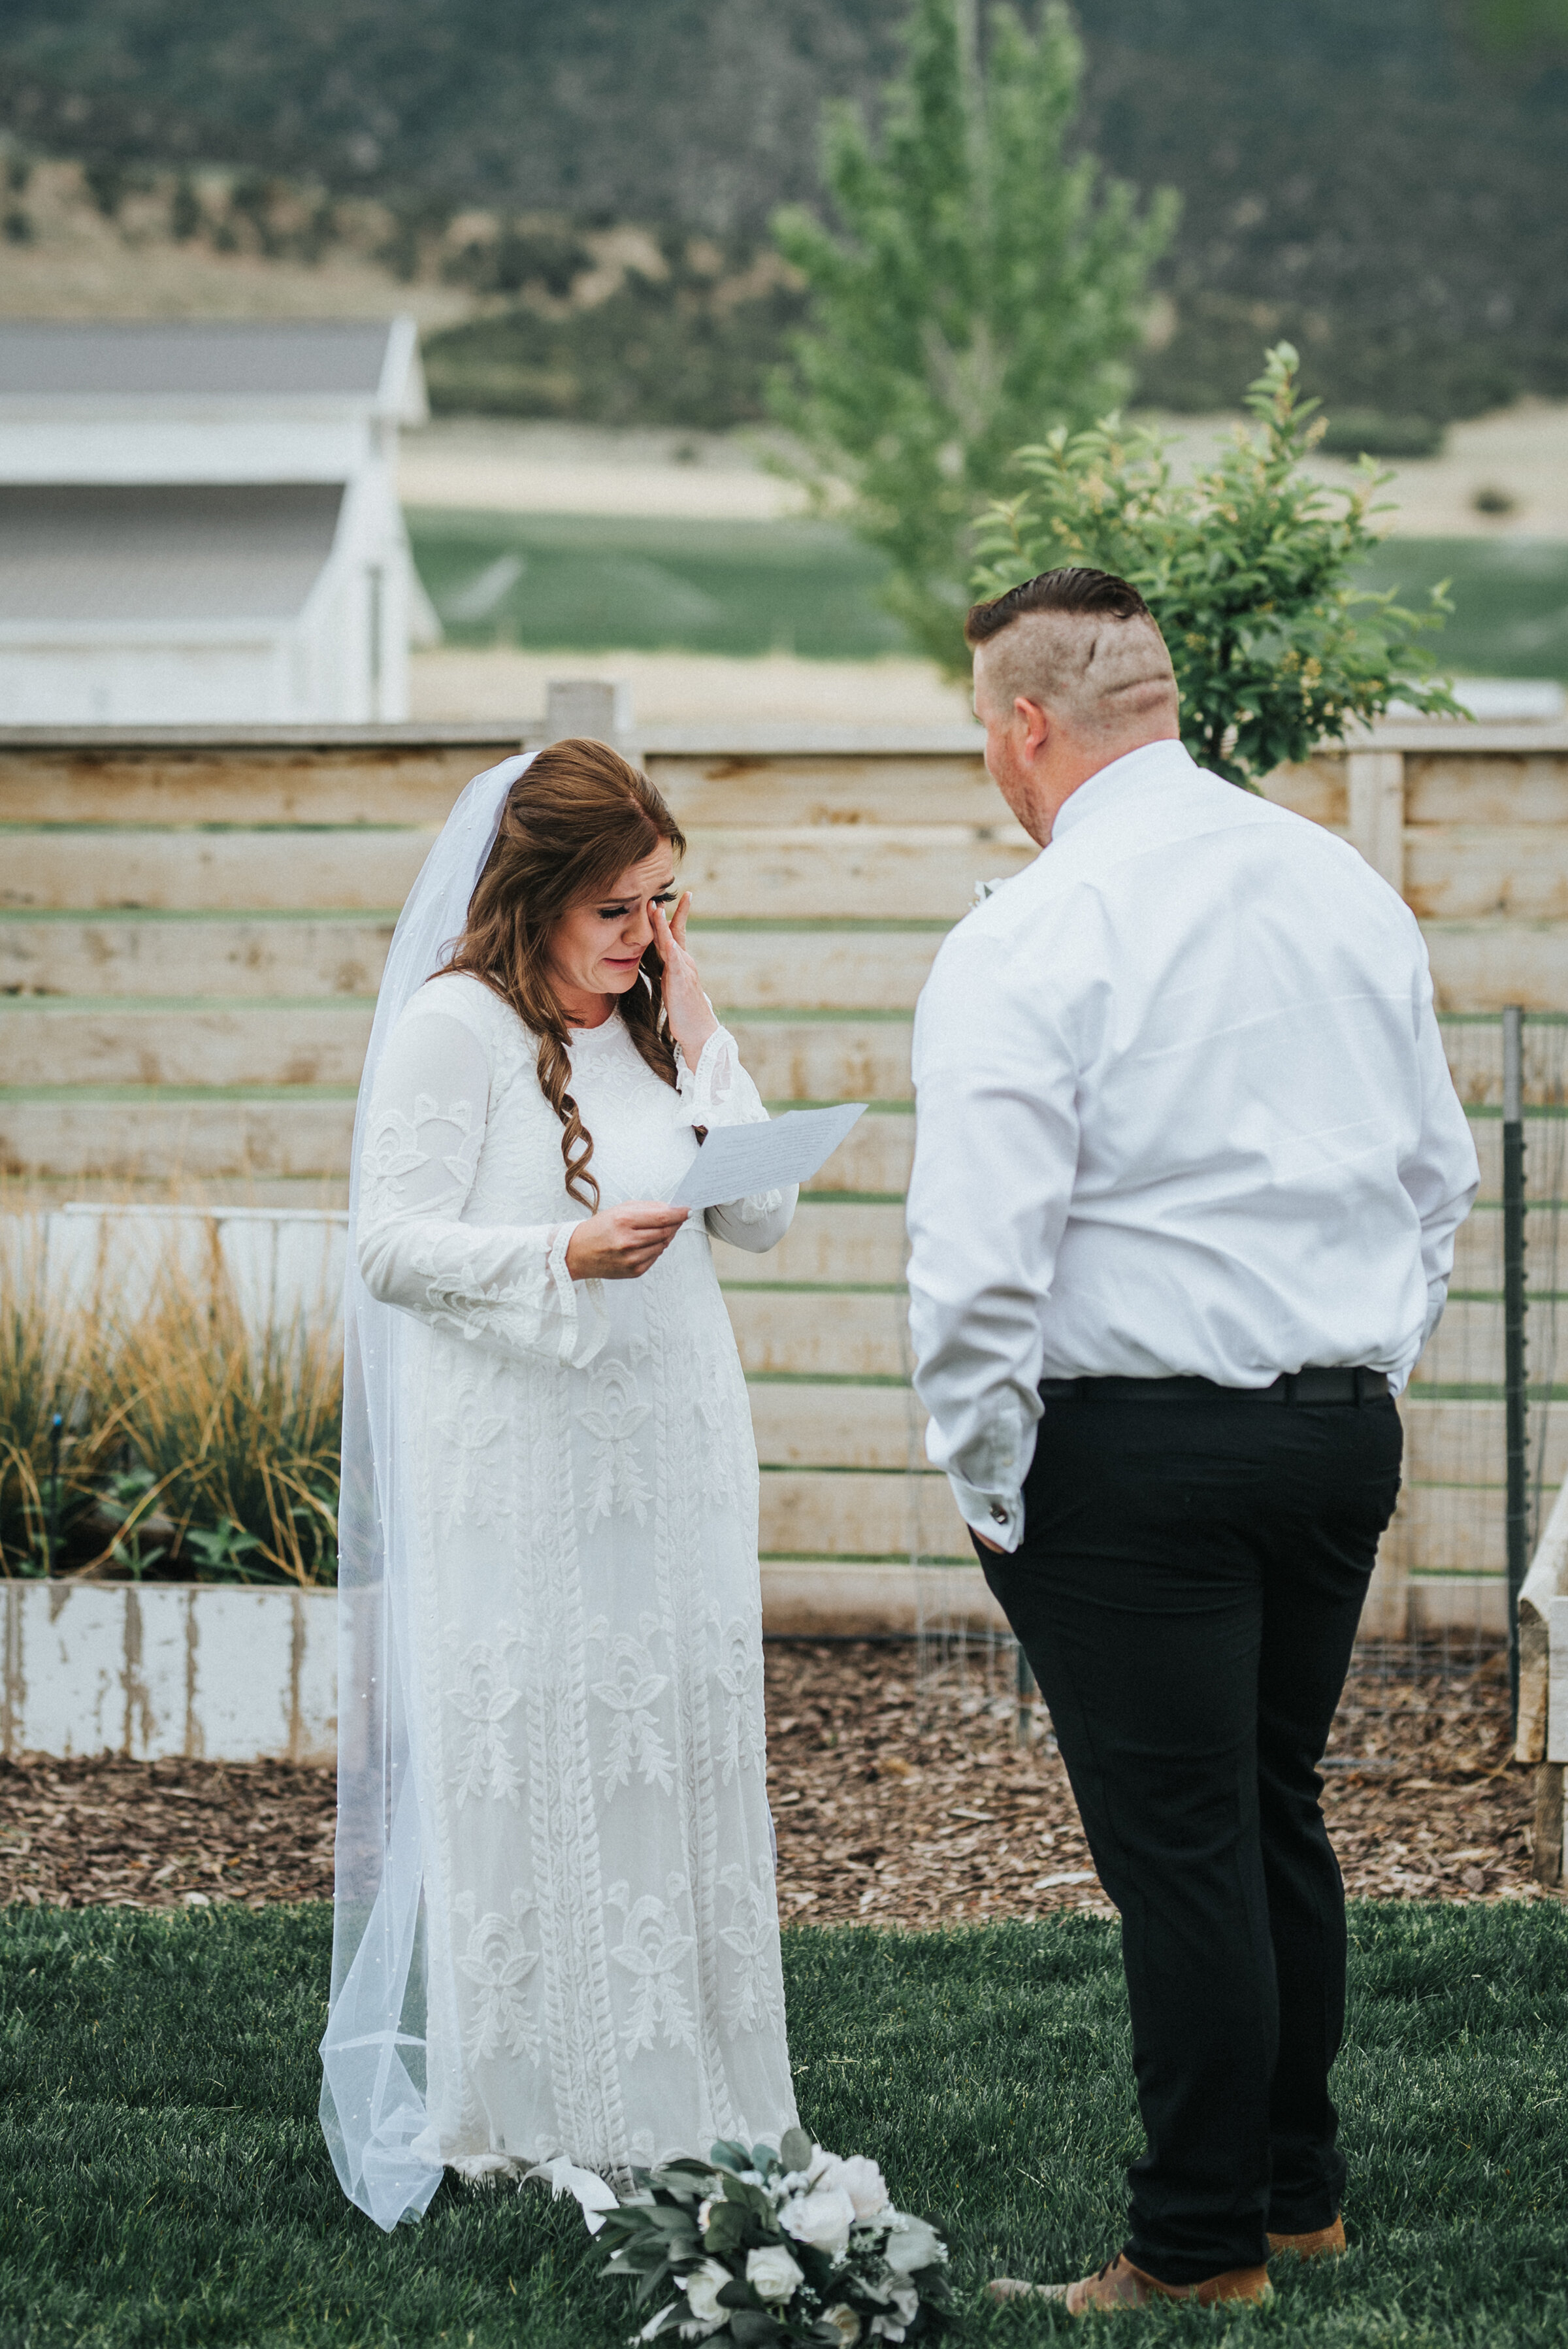  Wedding day vow exchange between the bride and the groom during their intimate outdoor wedding ceremony. photoshoot in Ephraim Utah photography wedding outdoor location western inspired rustic Airbnb photo aesthetic #ephraimutah #utahphotography #weddingdayphotography #gettingmarried #rusticwedding #utahwedding #westernstyle #weddingphotoshoot 